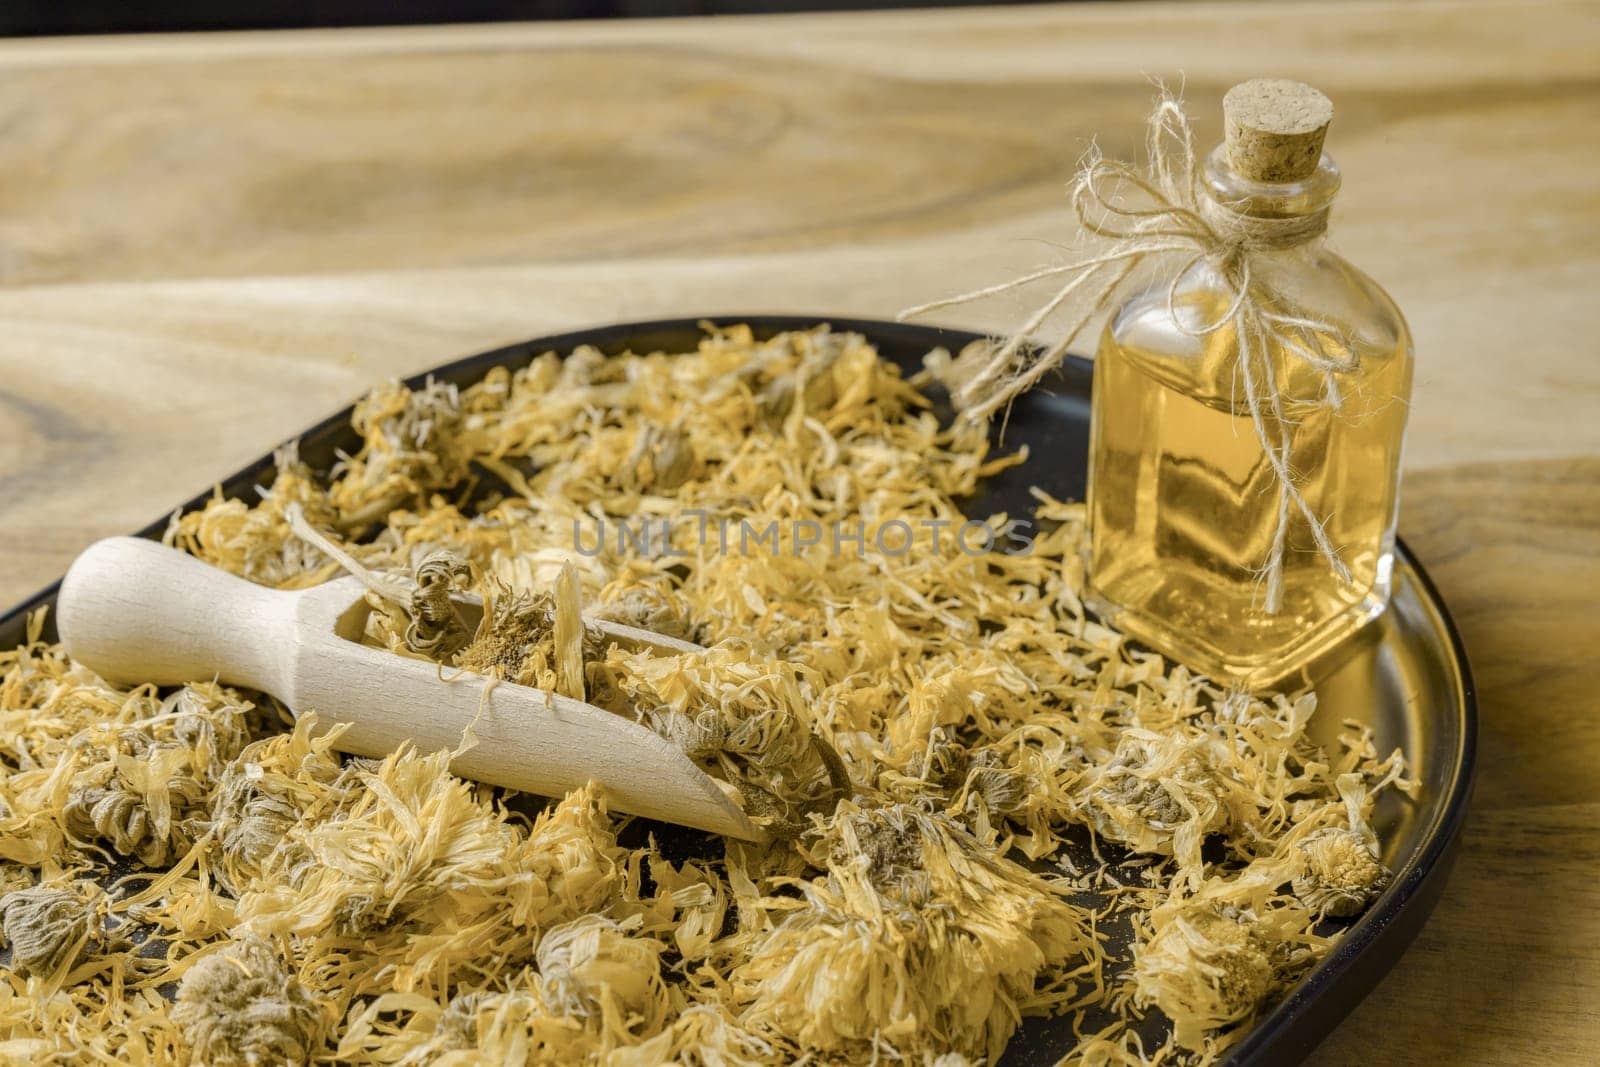 dried calendula flowers, Calendula officinalis, medicinal plant for therapeutic use, in a black tray with a bottle of calendula essential oil.